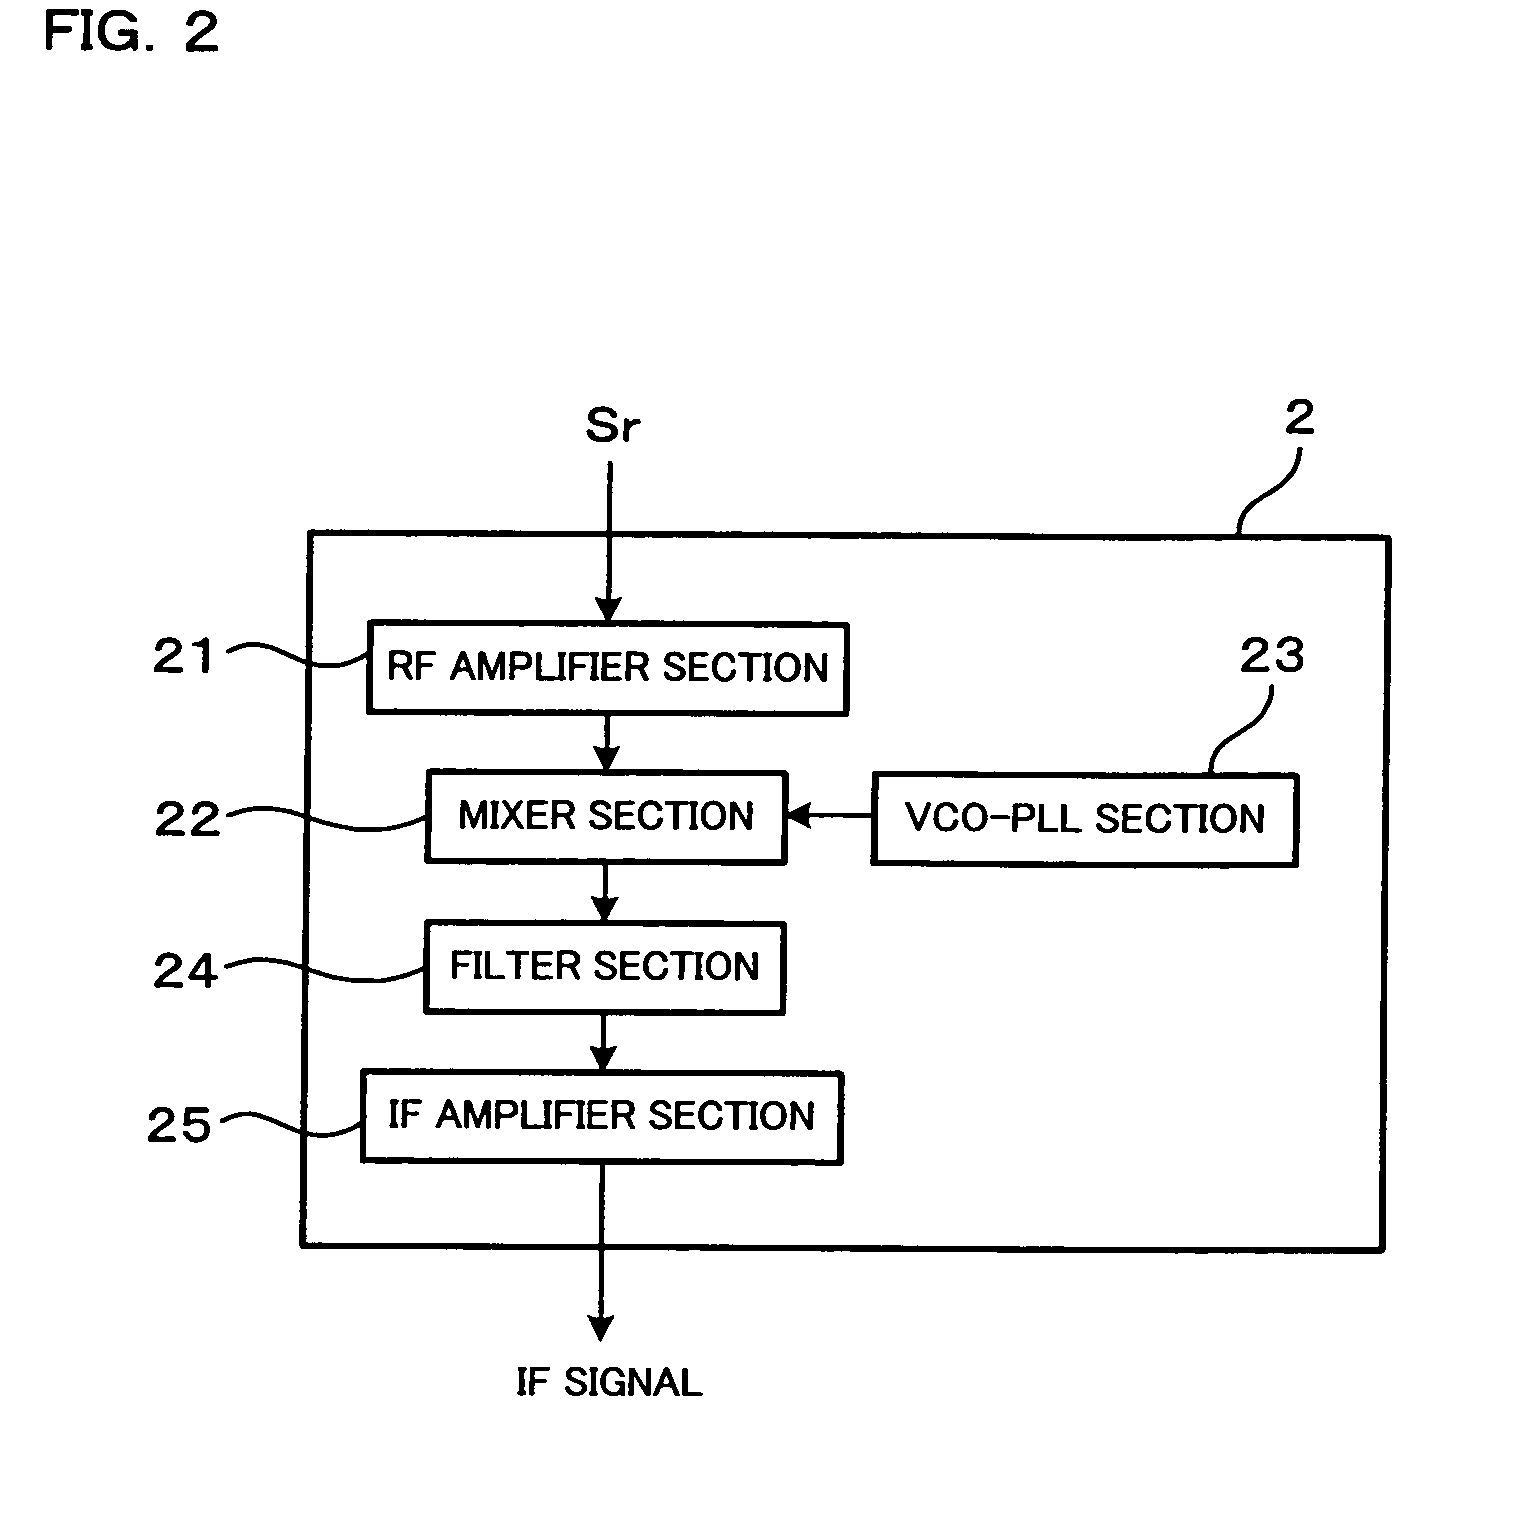 Digital demodulating apparatus, controlling method of the apparatus, computer program product for the apparatus, recording medium recording thereon the product, and digital receiver